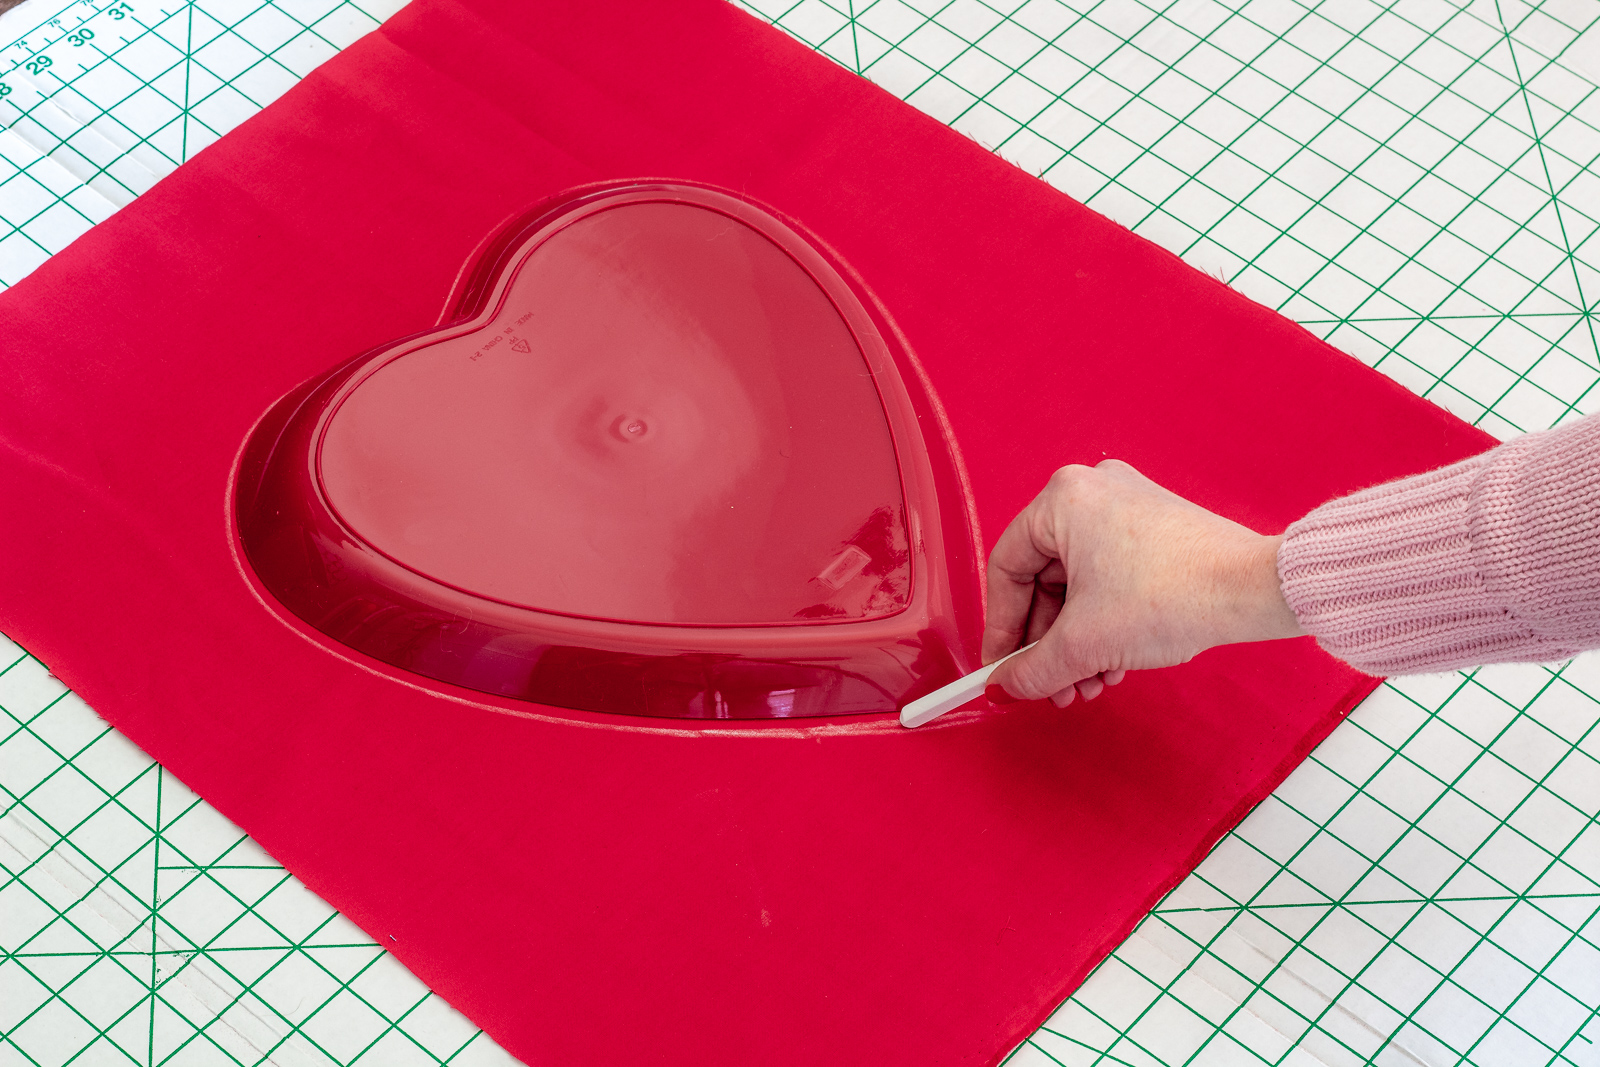 Trace or freehand a heart onto the fabric with chalk for the no sew heart pillow.